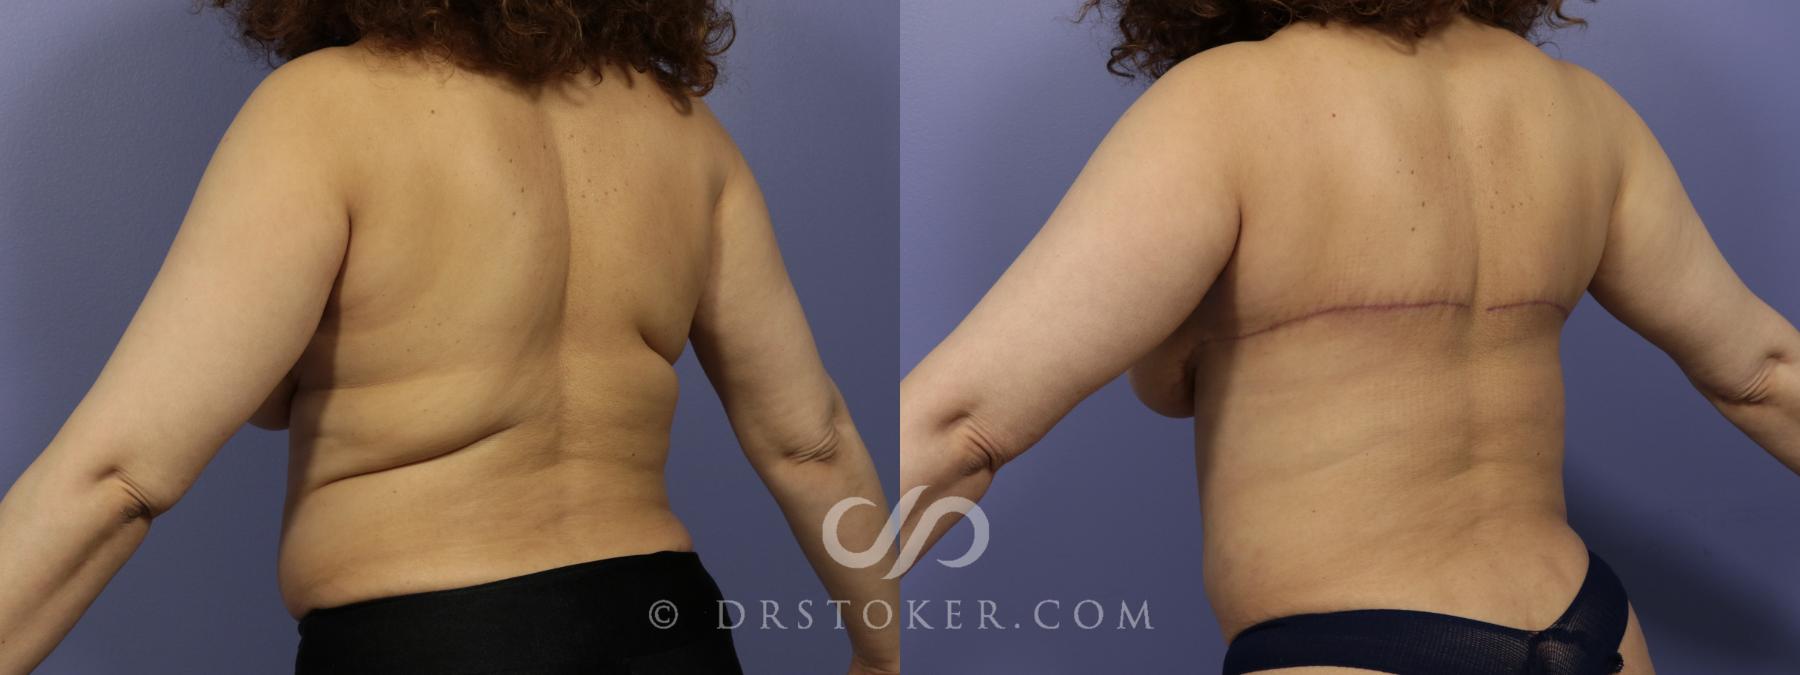 Patient 14089707  Bra Line Back Lift™ Before & After Photos